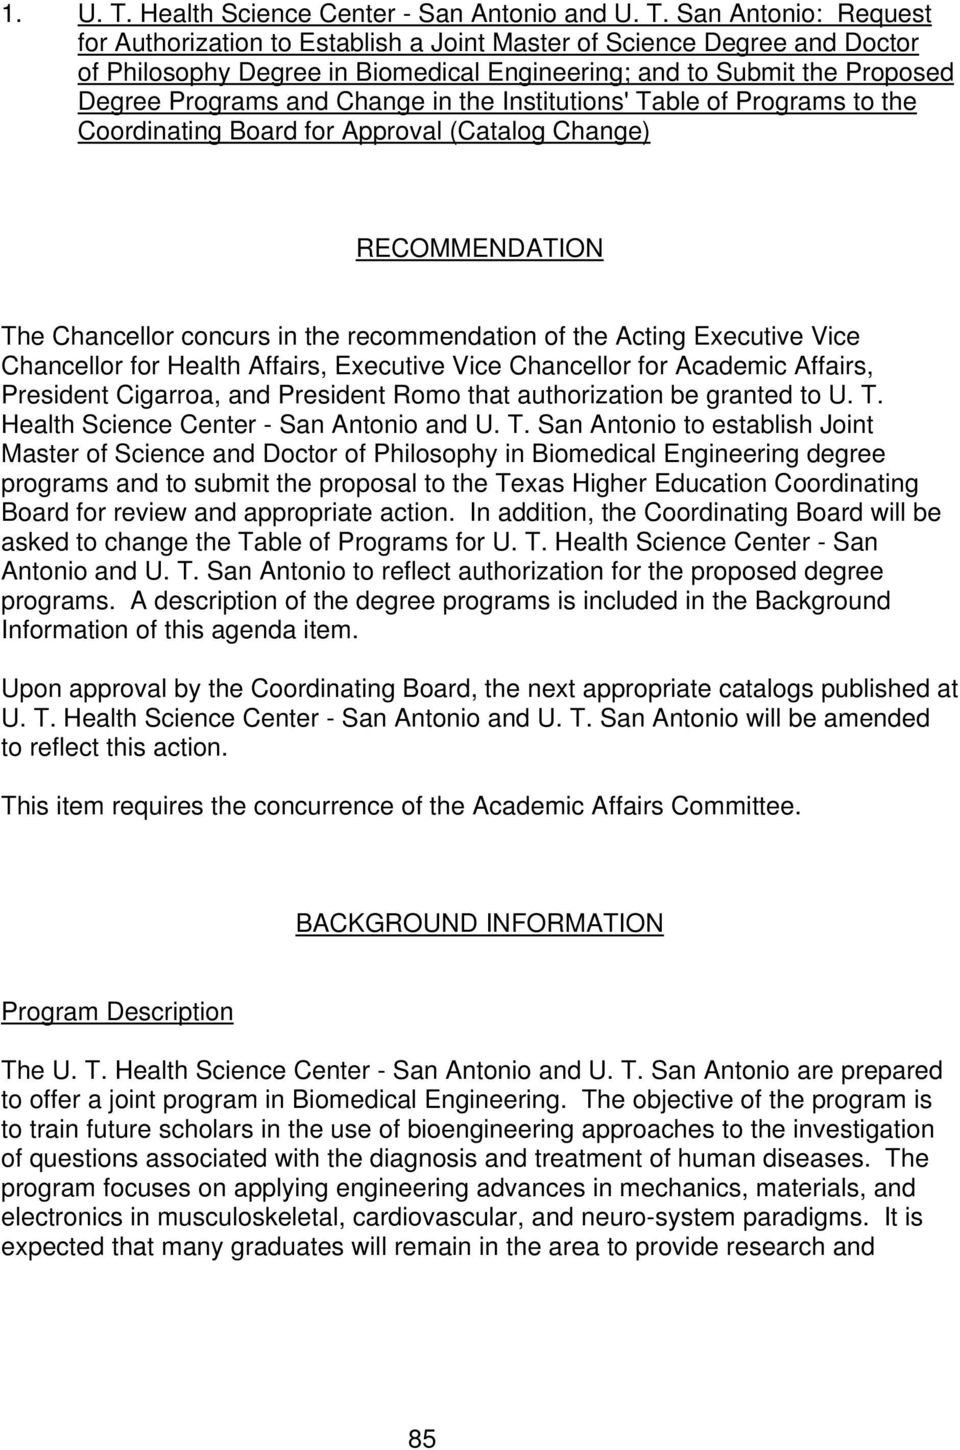 San Antonio: Request for Authorization to Establish a Joint Master of Science Degree and Doctor of Philosophy Degree in Biomedical Engineering; and to Submit the Proposed Degree Programs and Change